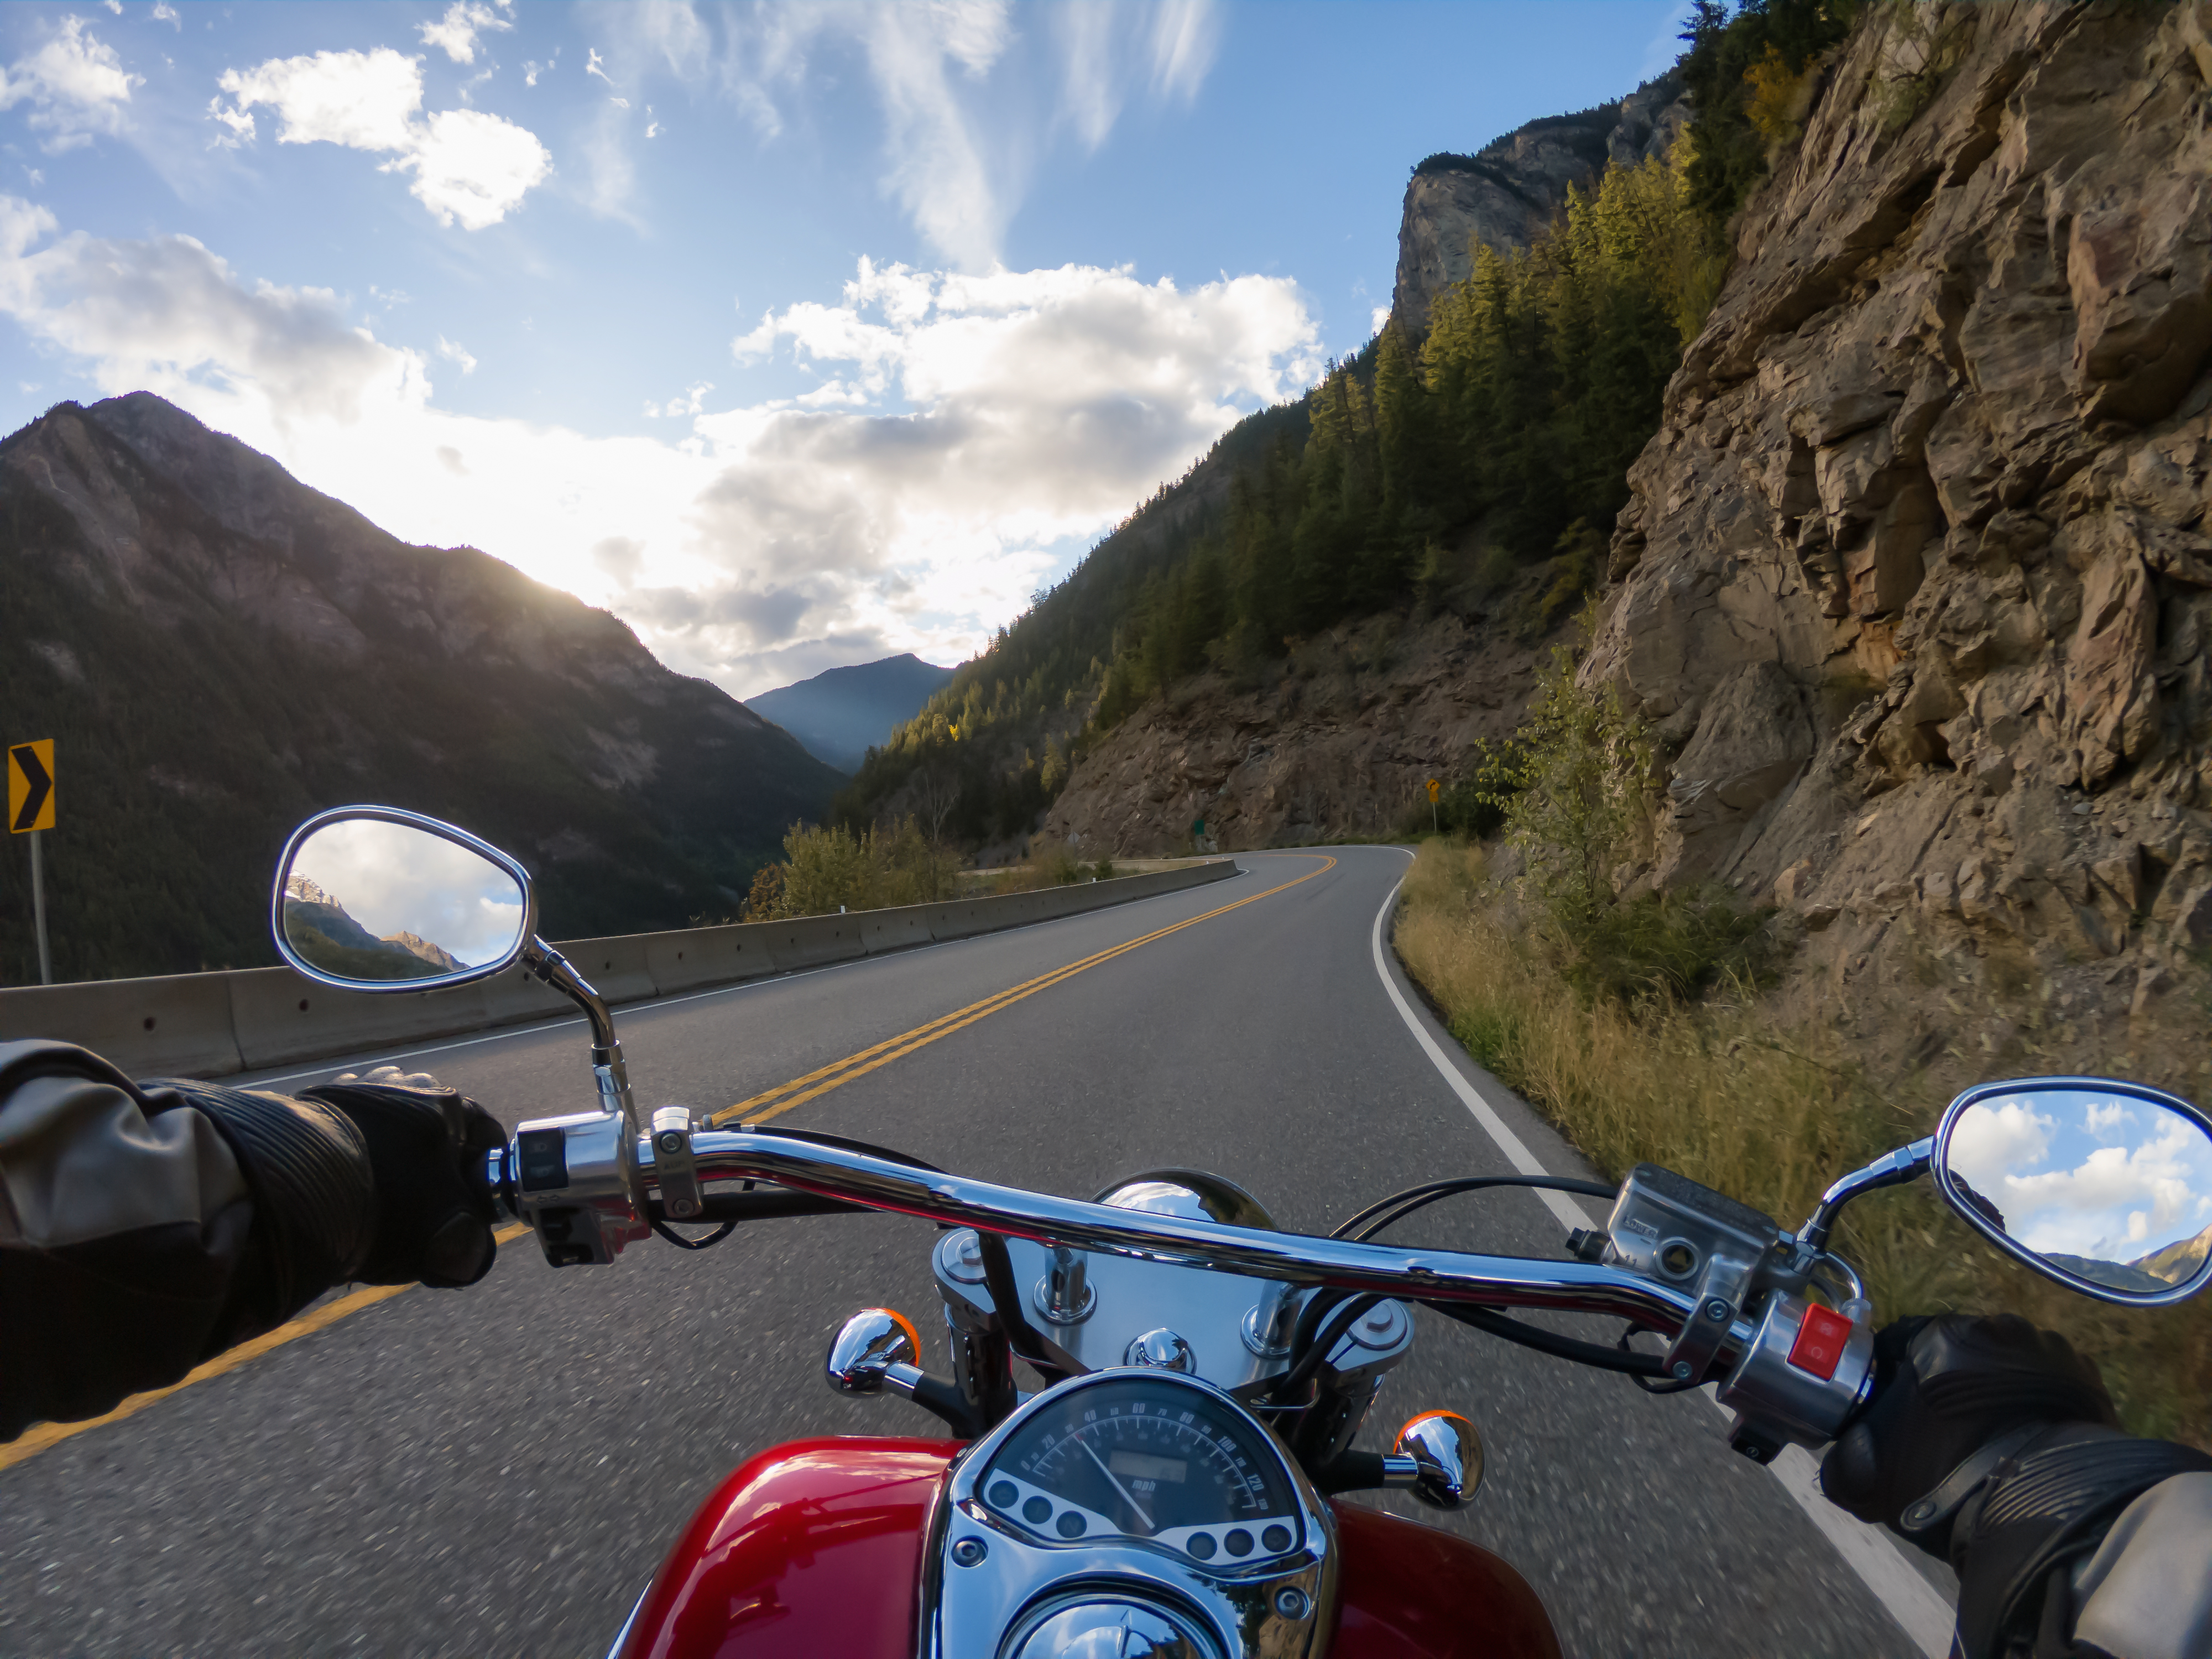 Riding on a motorcycle on a scenic road surrounded by the Canadian Mountains